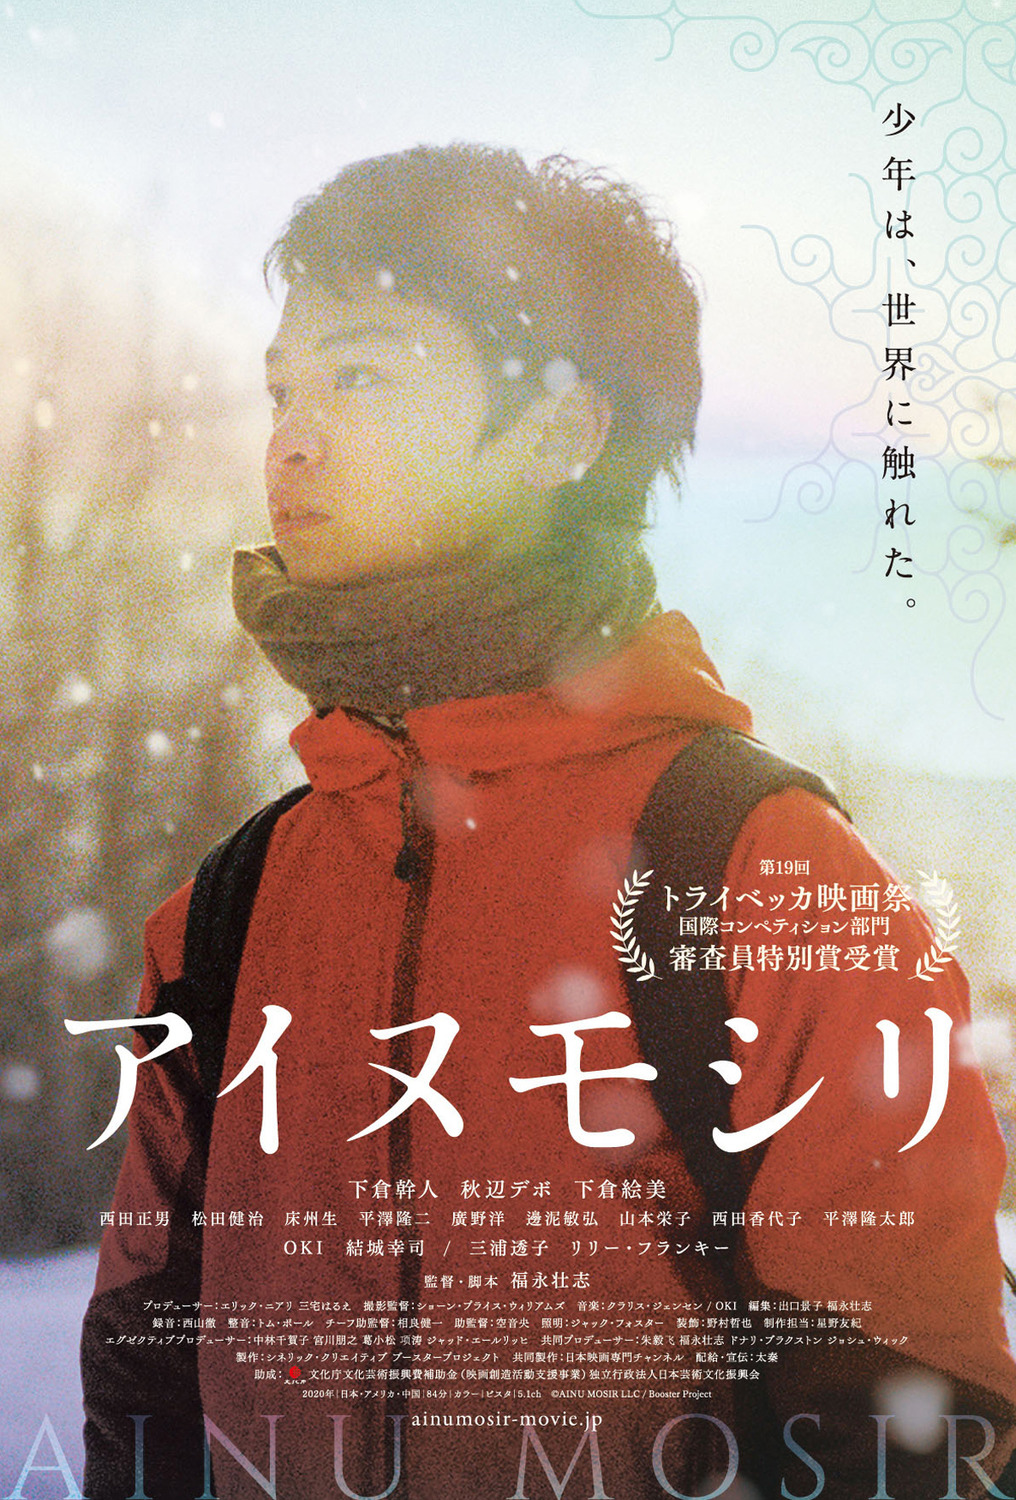 Extra Large Movie Poster Image for Ainu Mosir (#1 of 2)